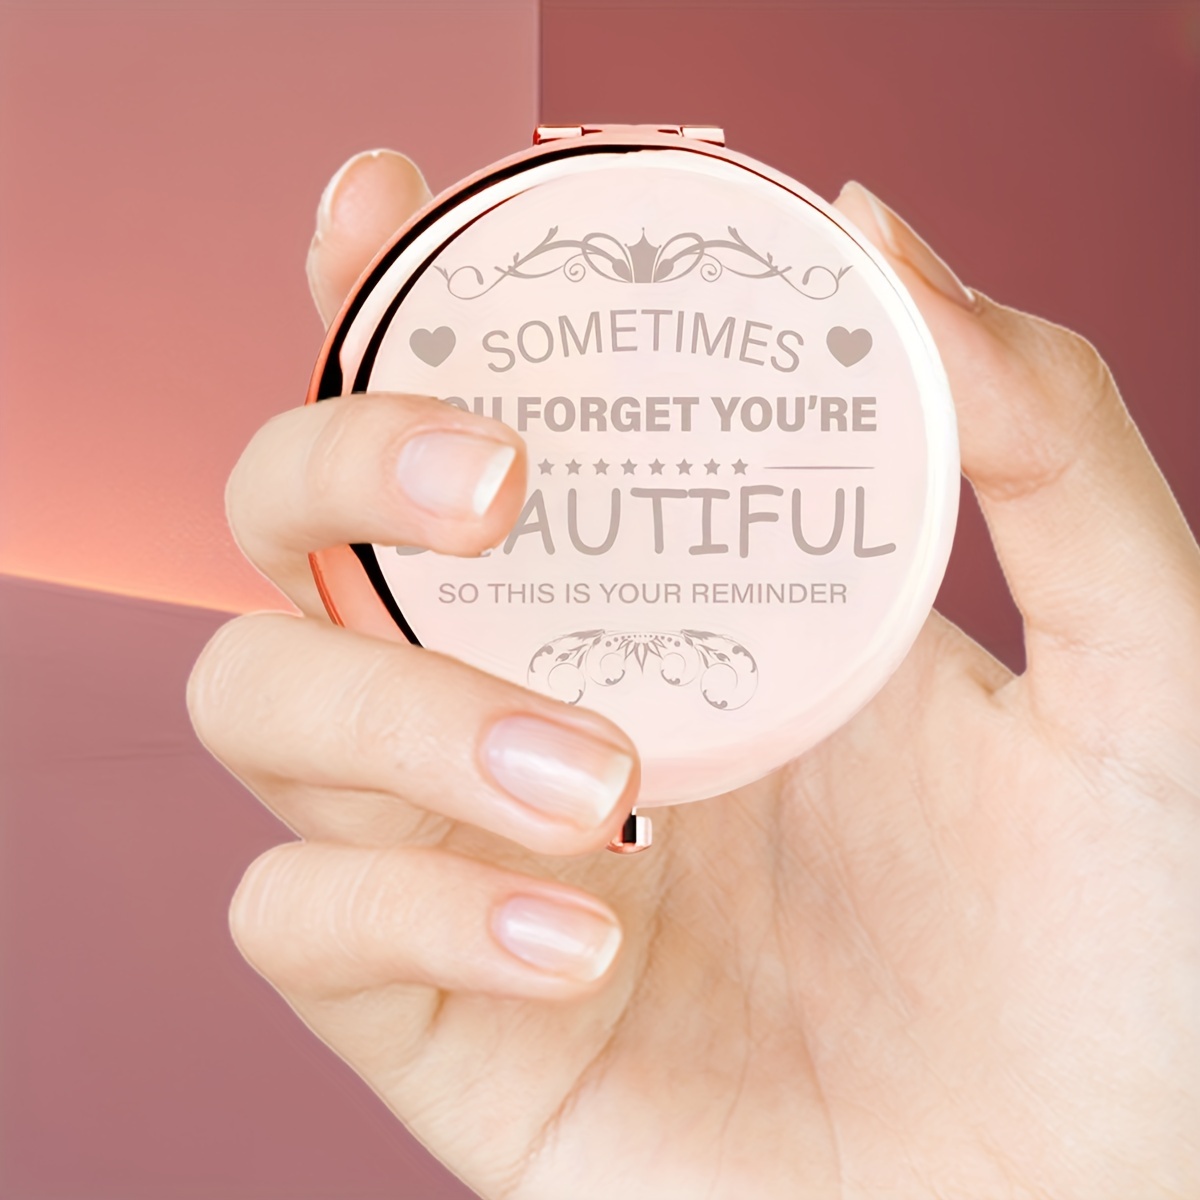 

Inspirational Compact Mirror, Pocket-sized Folding Mini Makeup Mirror, "sometimes You Forget You're Beautiful" Reminder Design, Perfect Gift For Women, Daily Use, Birthday